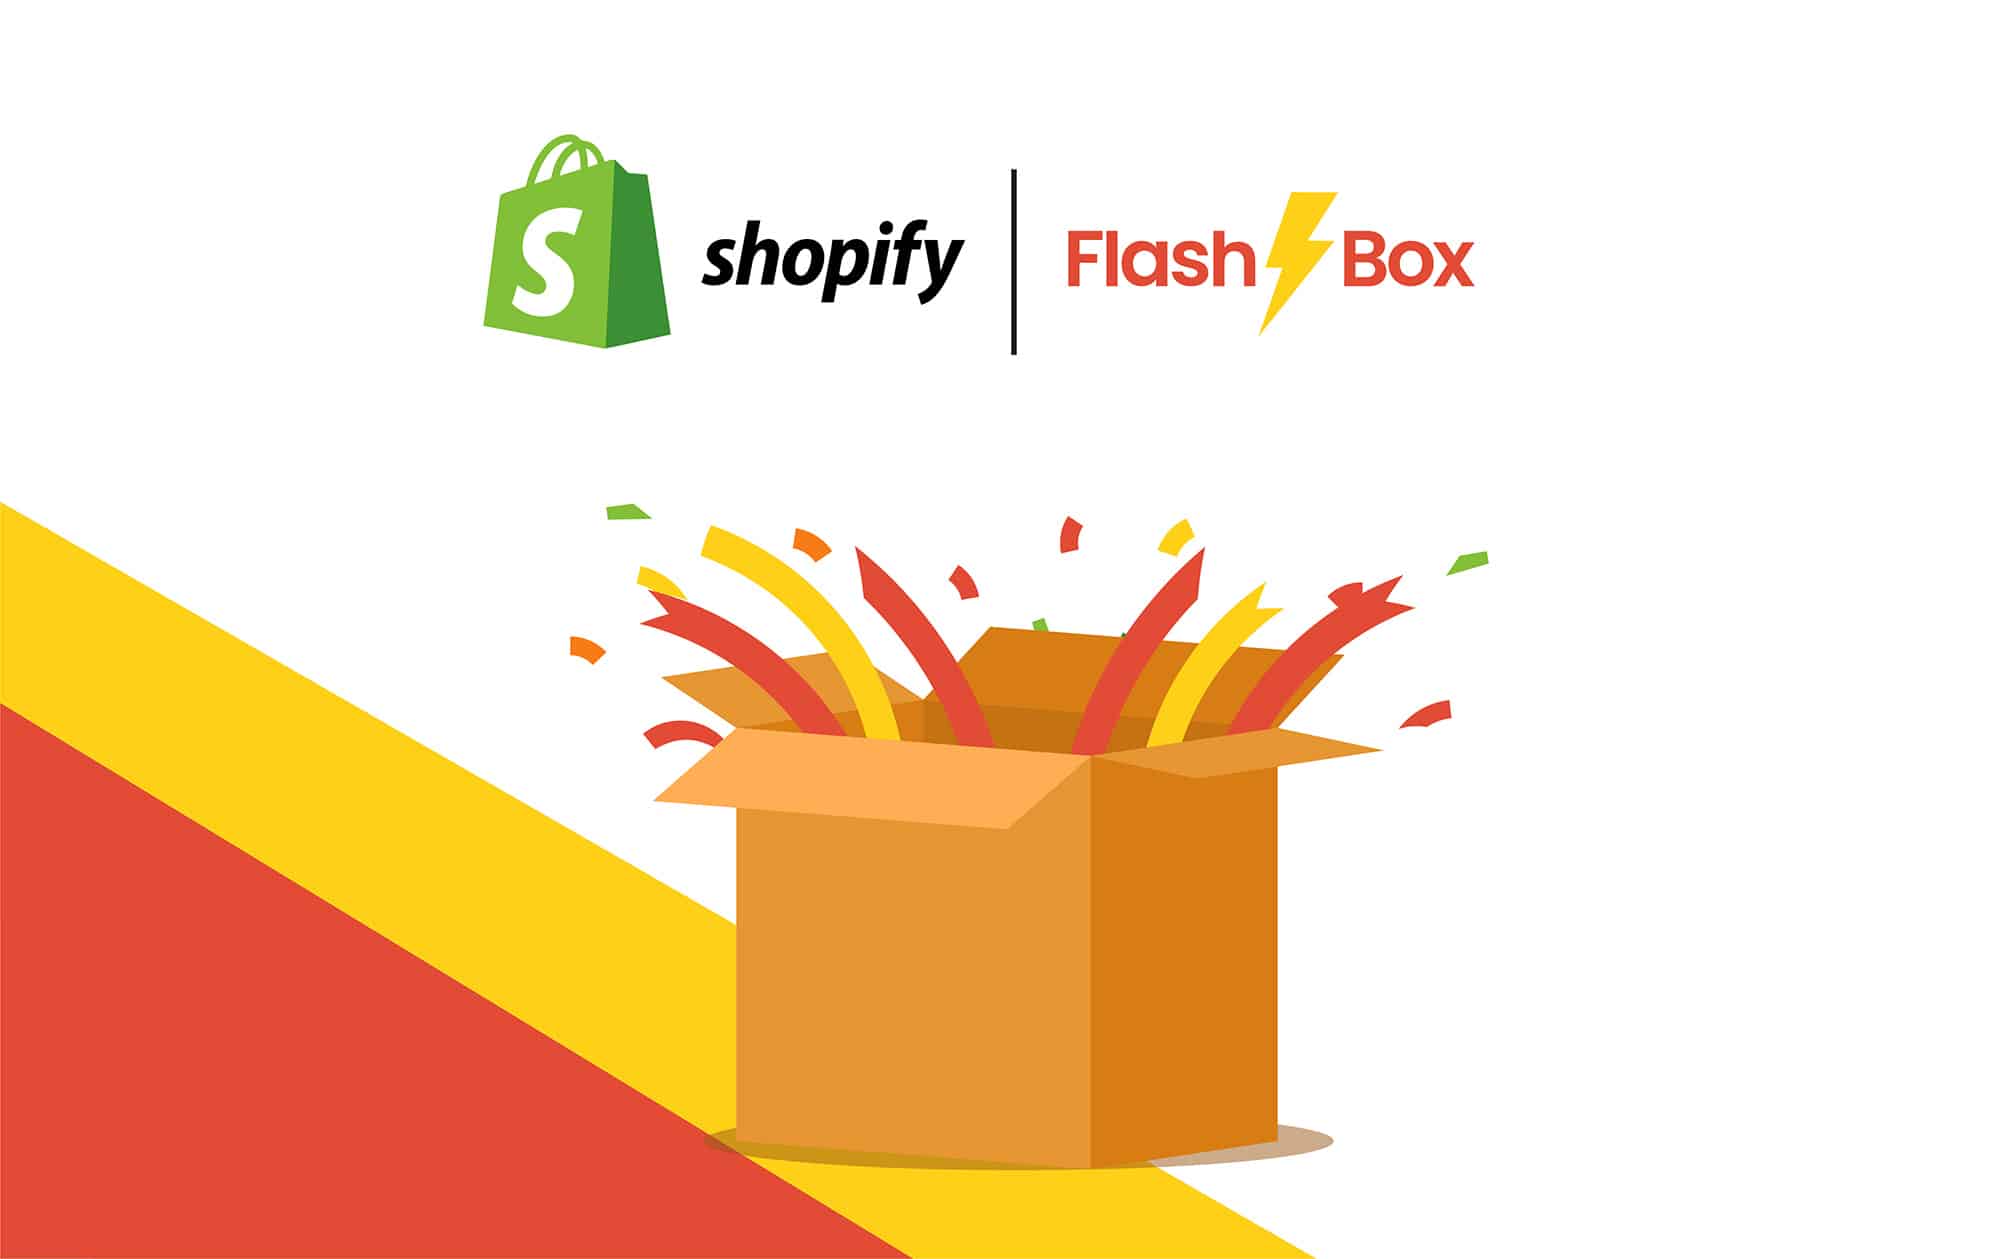 FlashBox and Shopify Launch